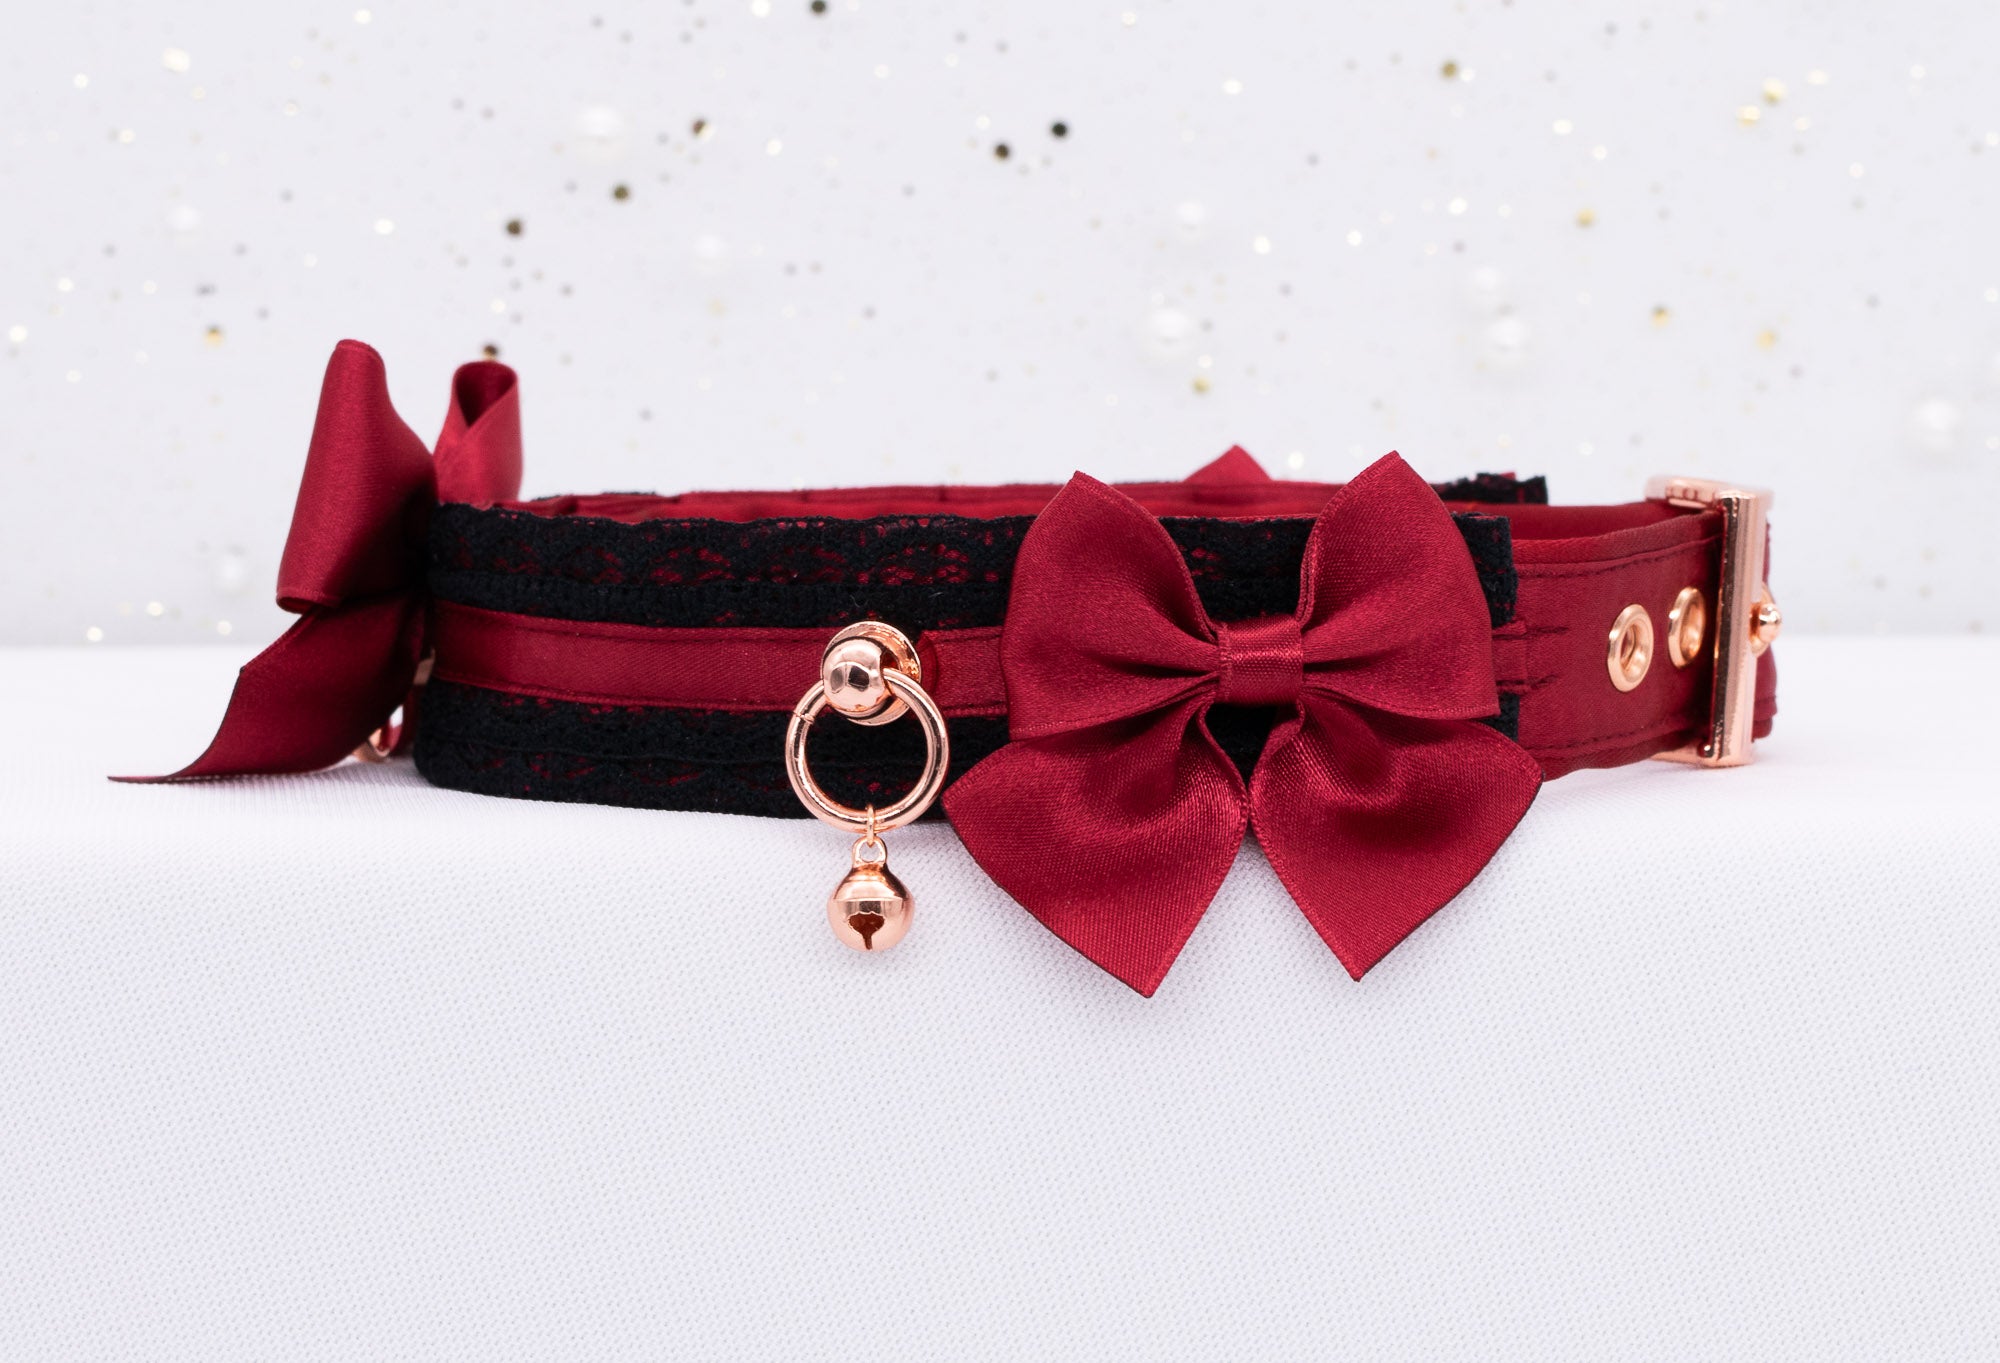 Crimson and Black Lace Collar and Leash Set in Rose Gold